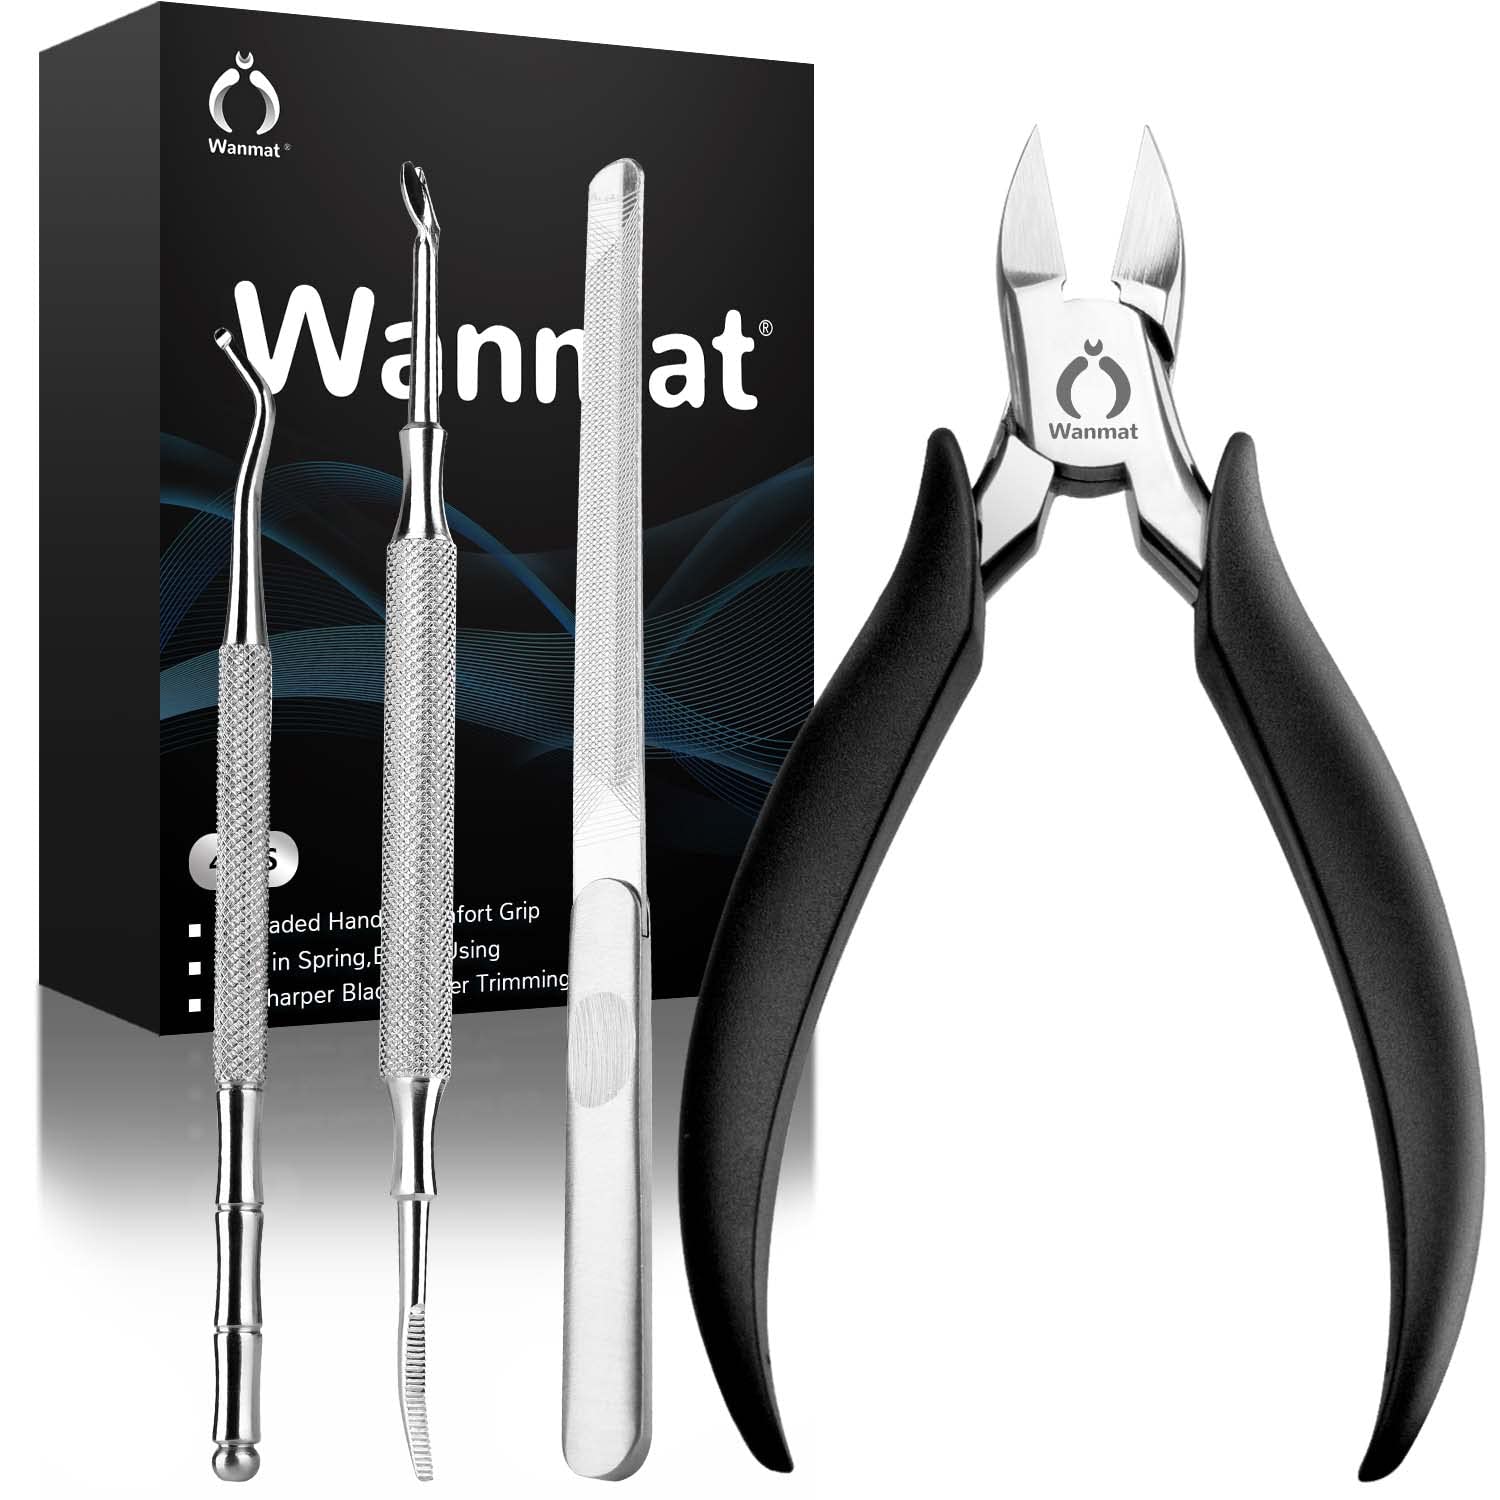 2 Pack Toe Nail Clipper for Ingrown & Thick Toenails Toenails Trimmer and  Professional Podiatrist Toenail Nipper for Seniors with Surgical Stainless  Steel Surper Sharp Blades Soft Handle 